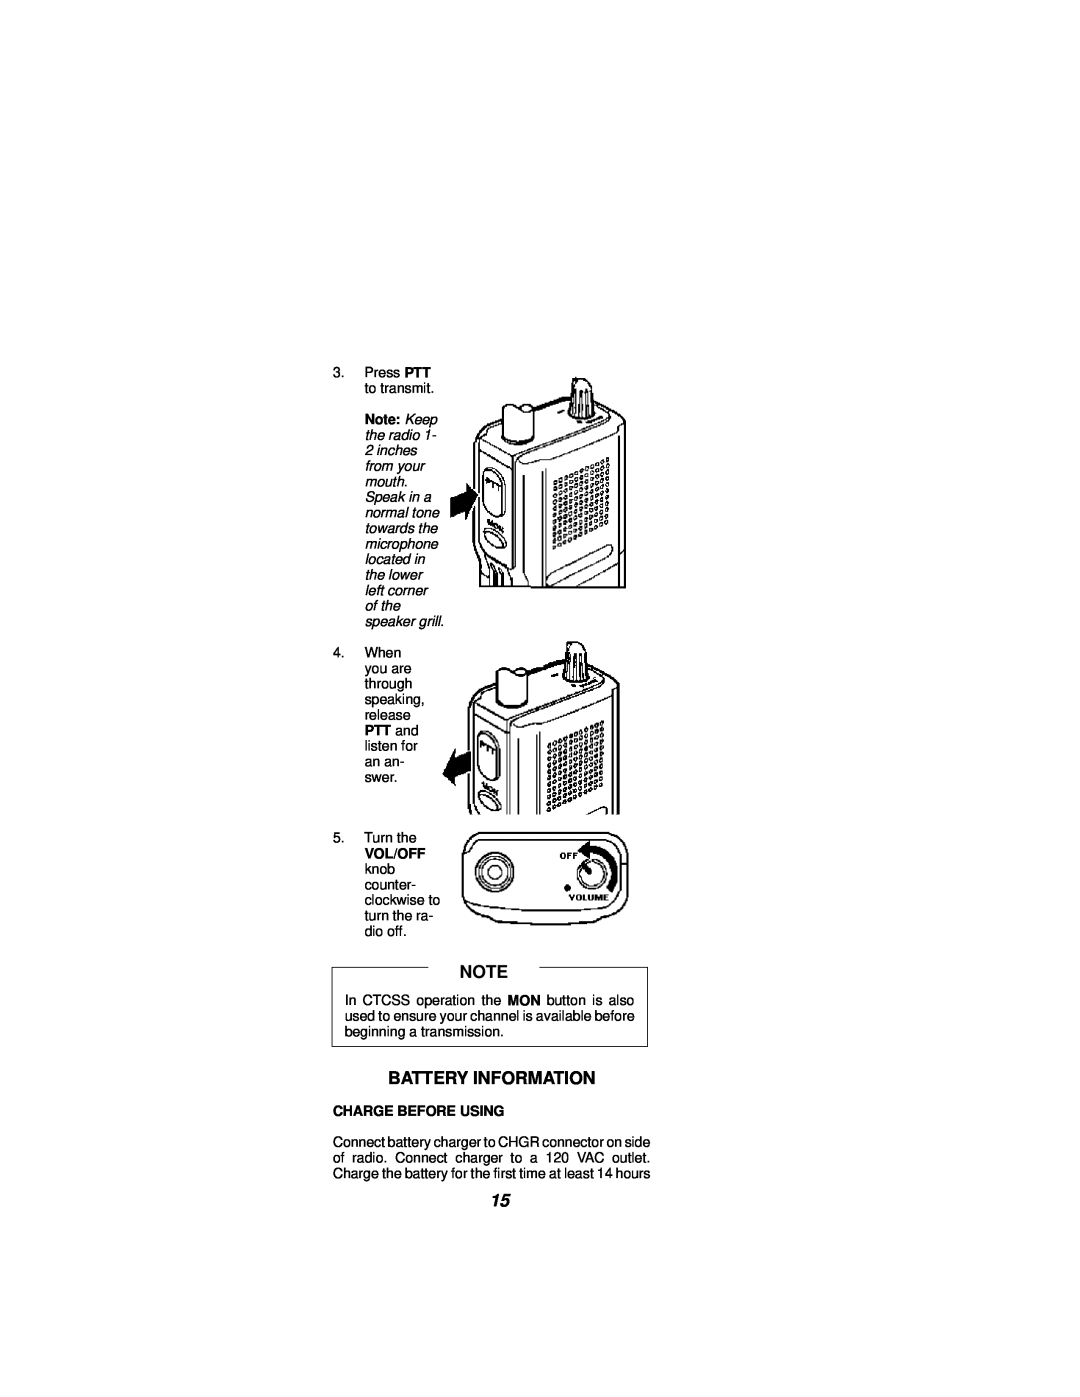 Ericsson NPC-50 manual Battery Information, Charge Before Using 